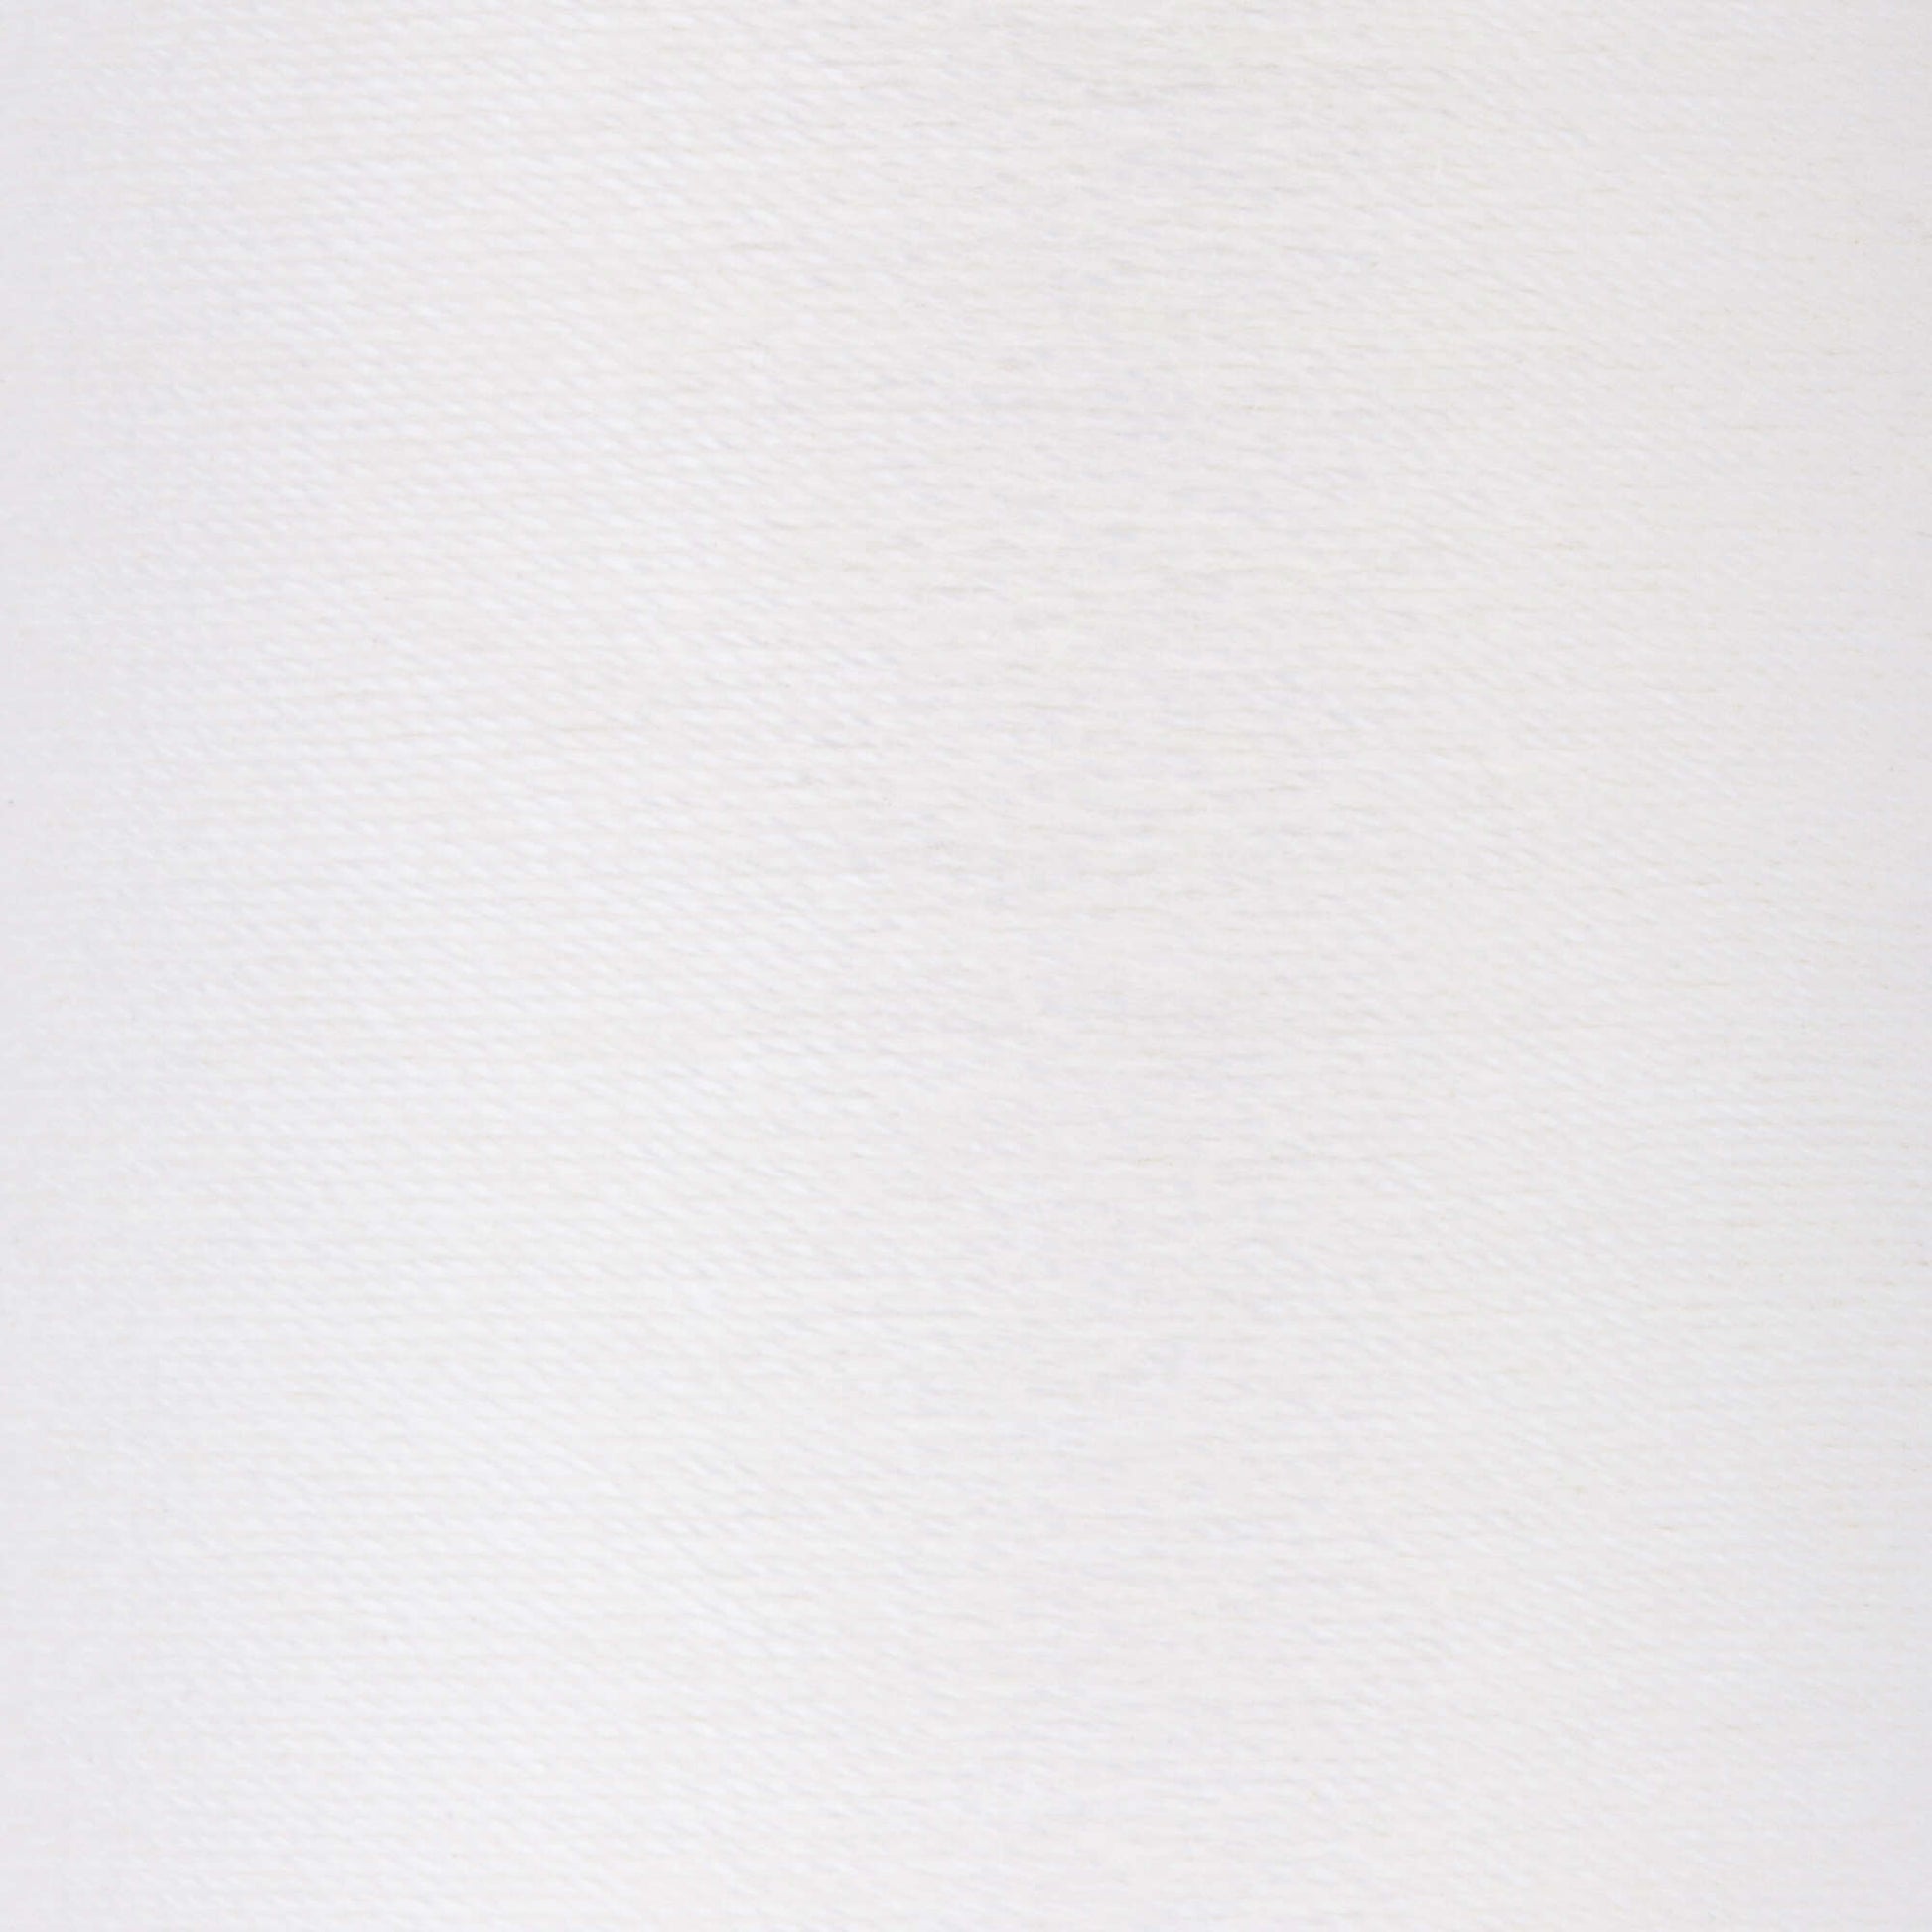 Coats & Clark Cotton Covered Quilting & Piecing Thread (250 Yards) White